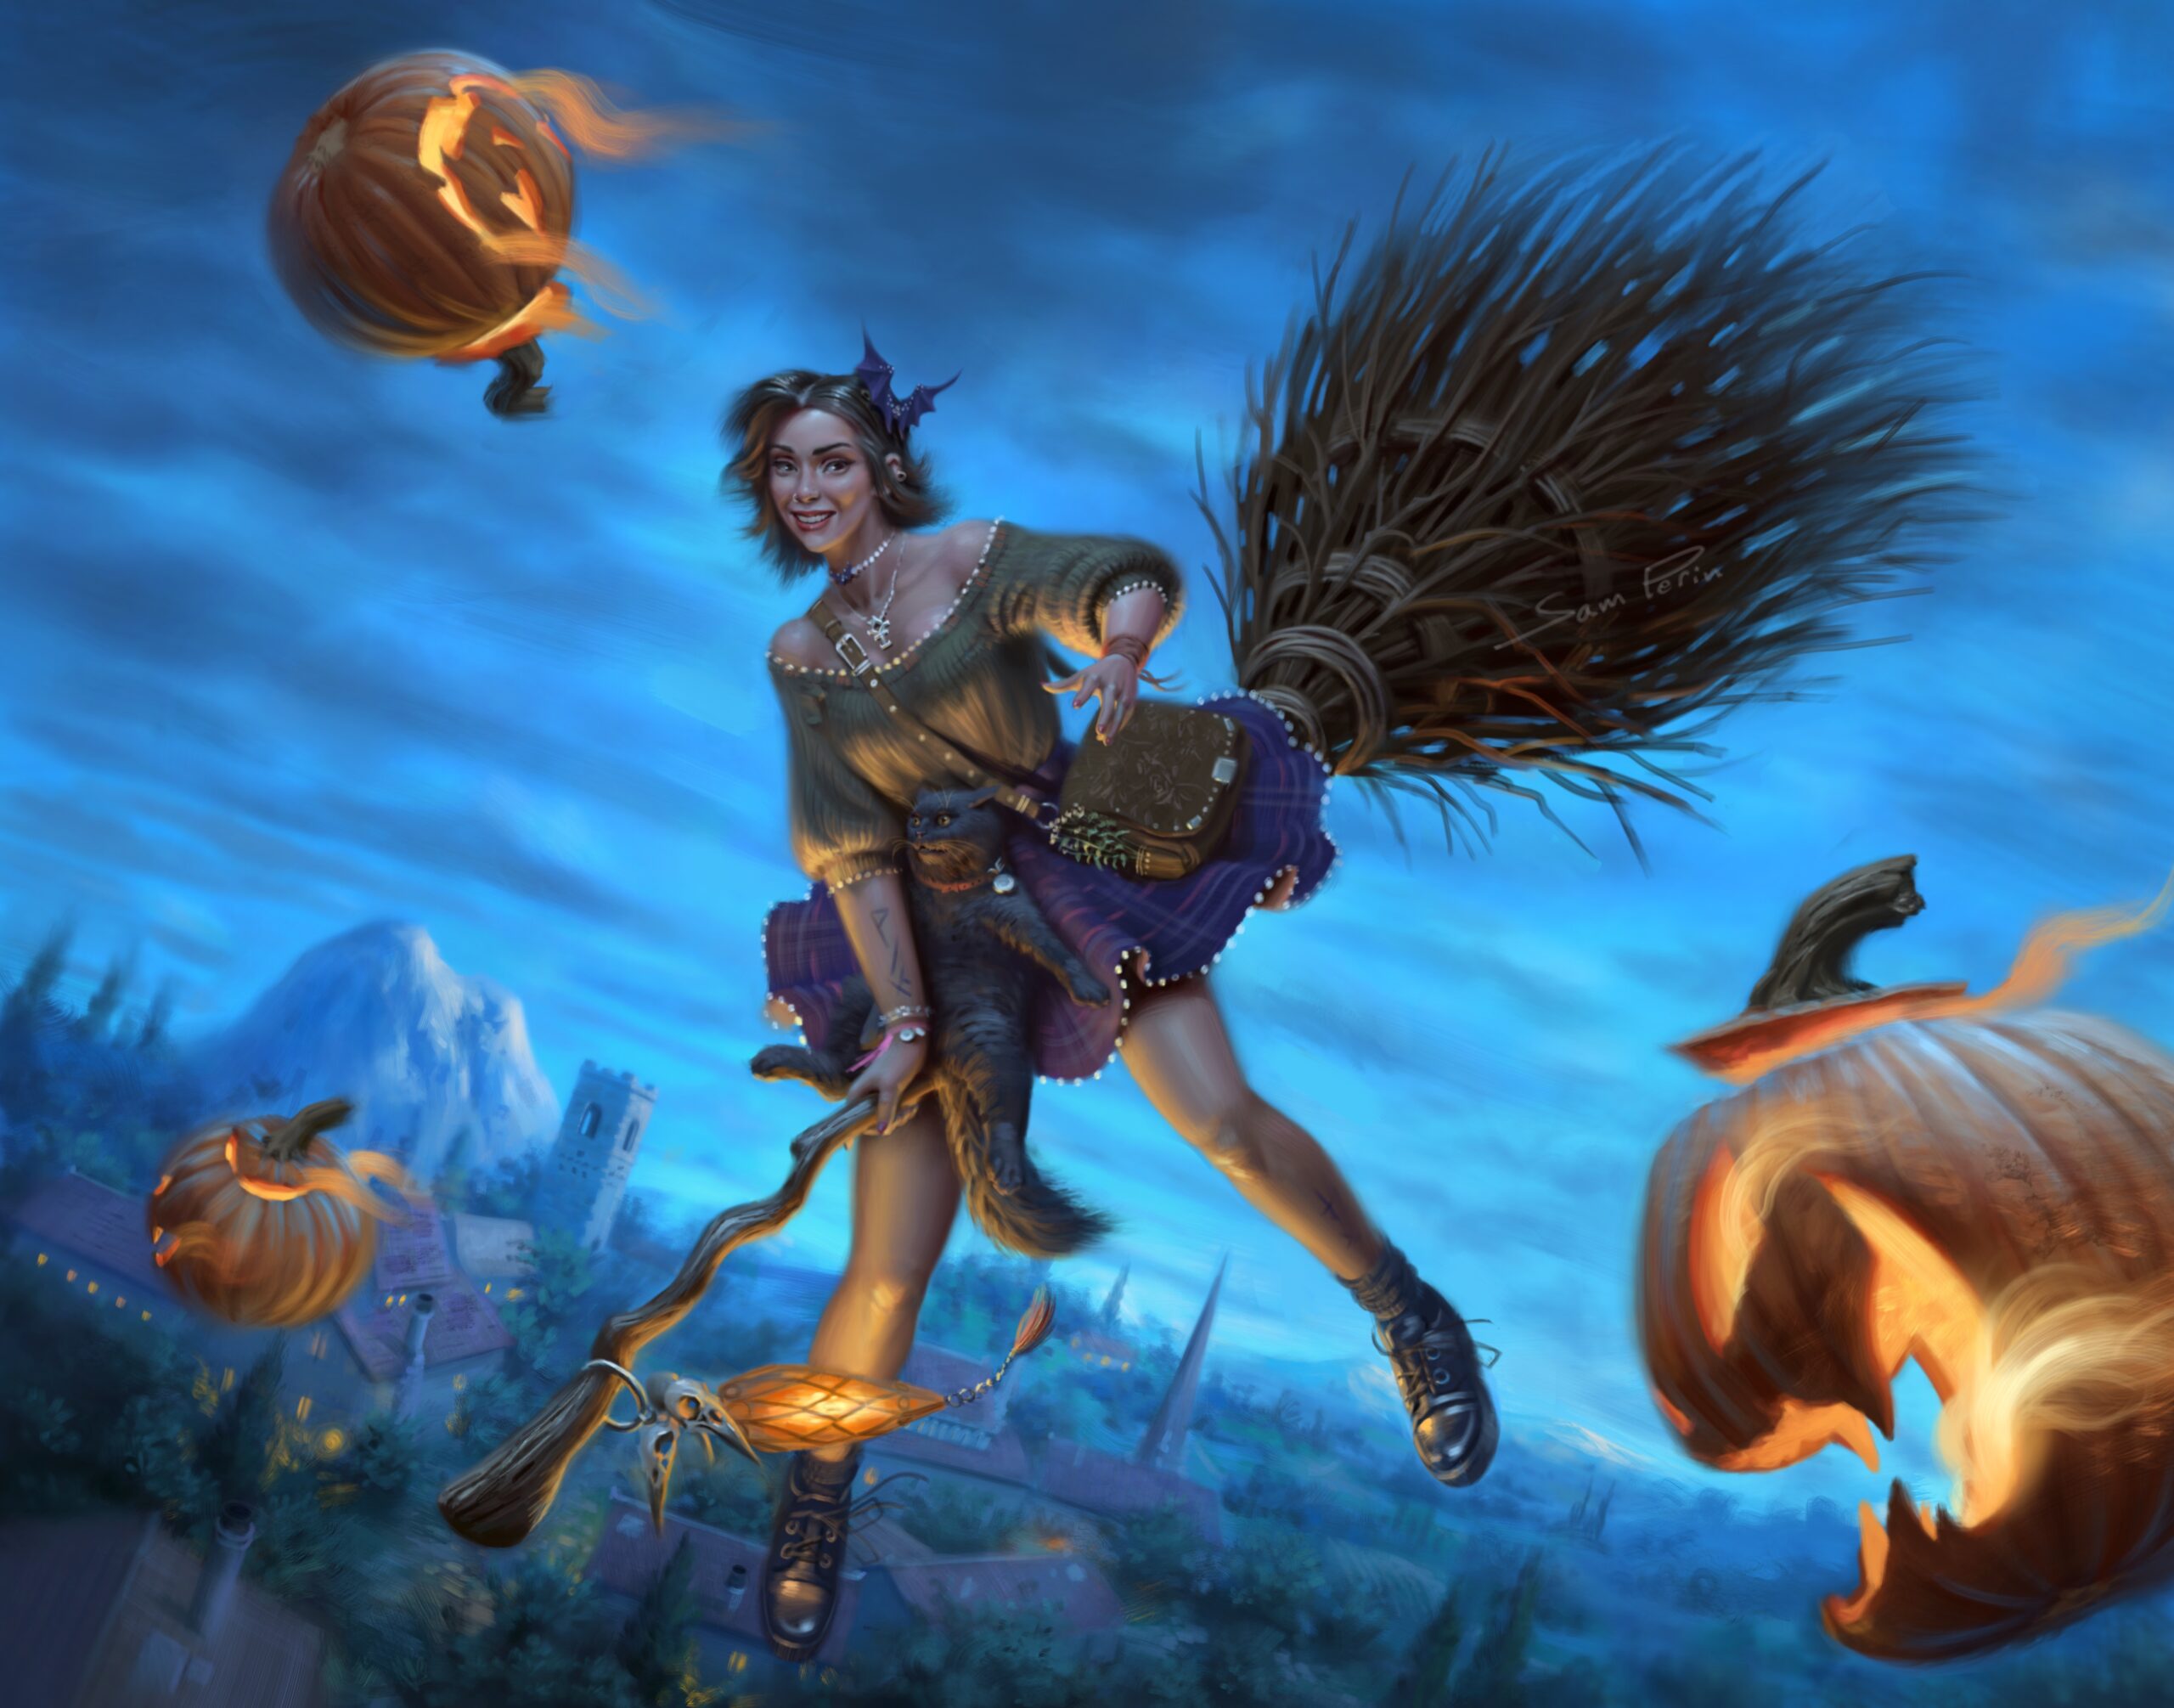 Halloween Witch flying on broom with black cat and magical flying pumpkins.